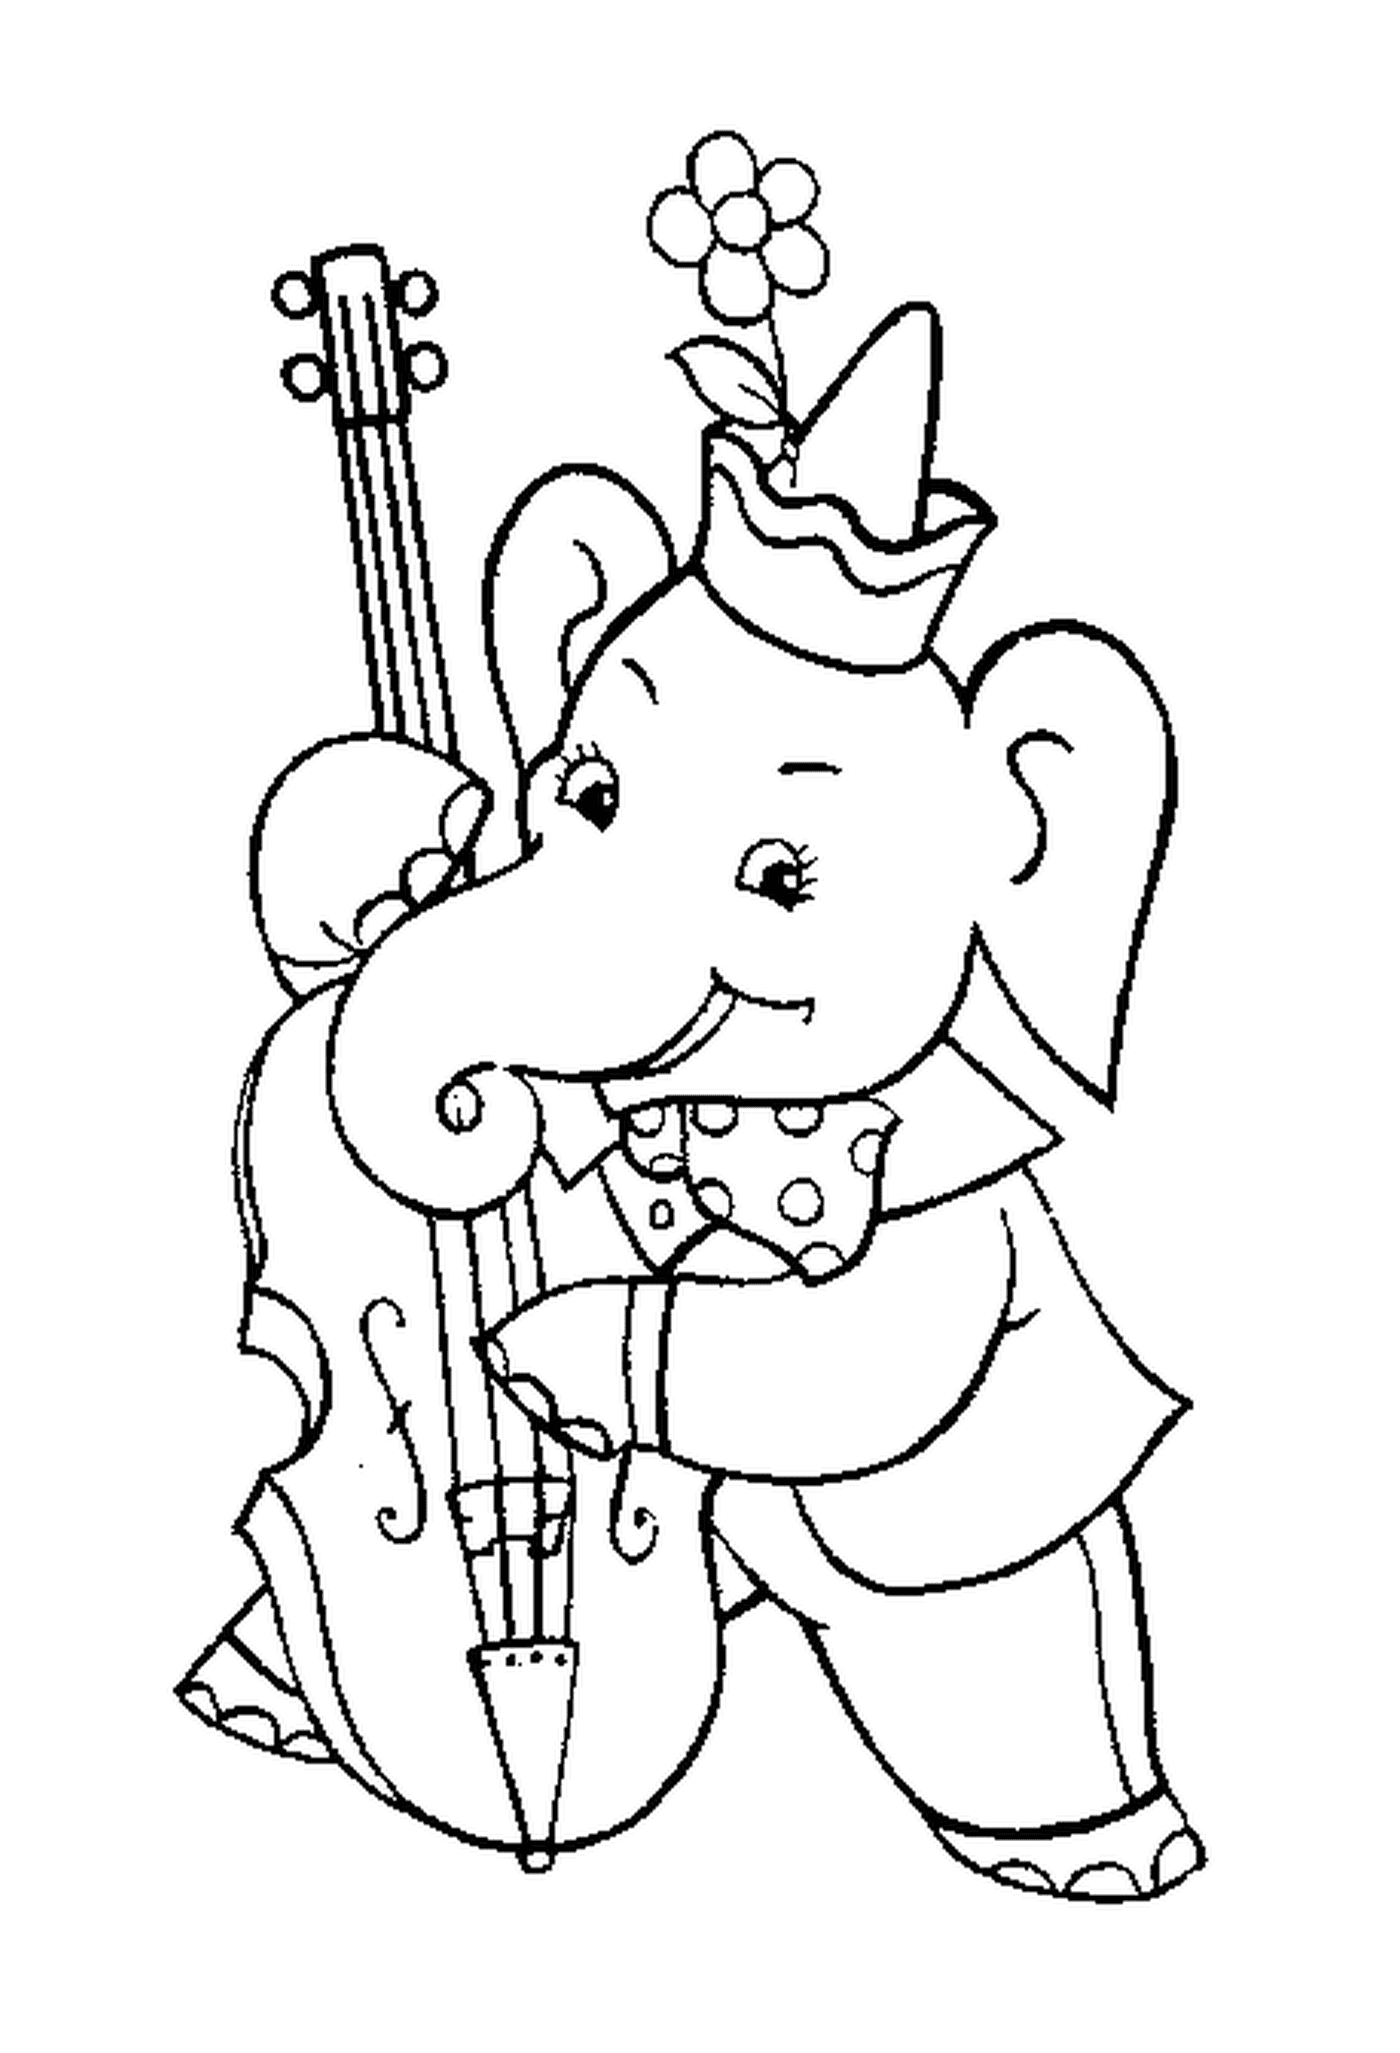  An elephant playing the cello 